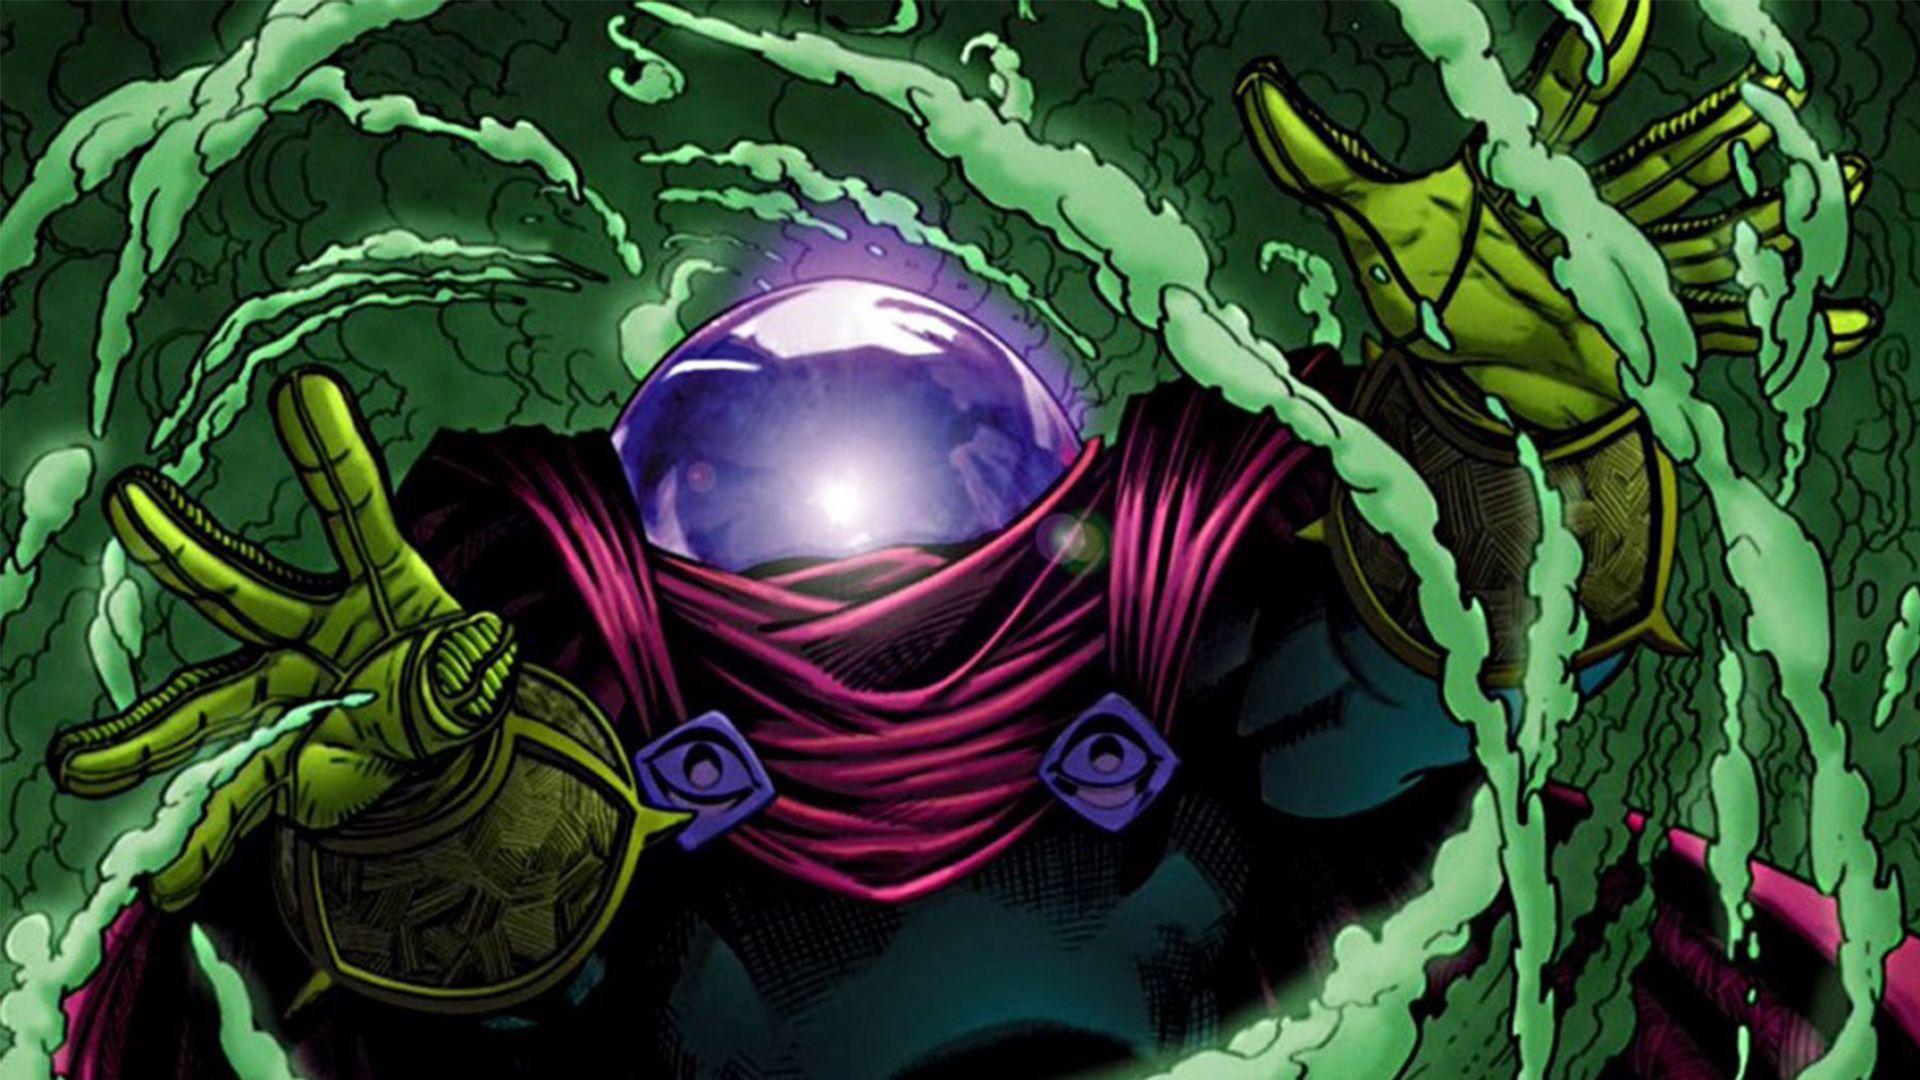 Spider Man: Far From Home: Jake Gyllenhaal Is Suited Up As Mysterio